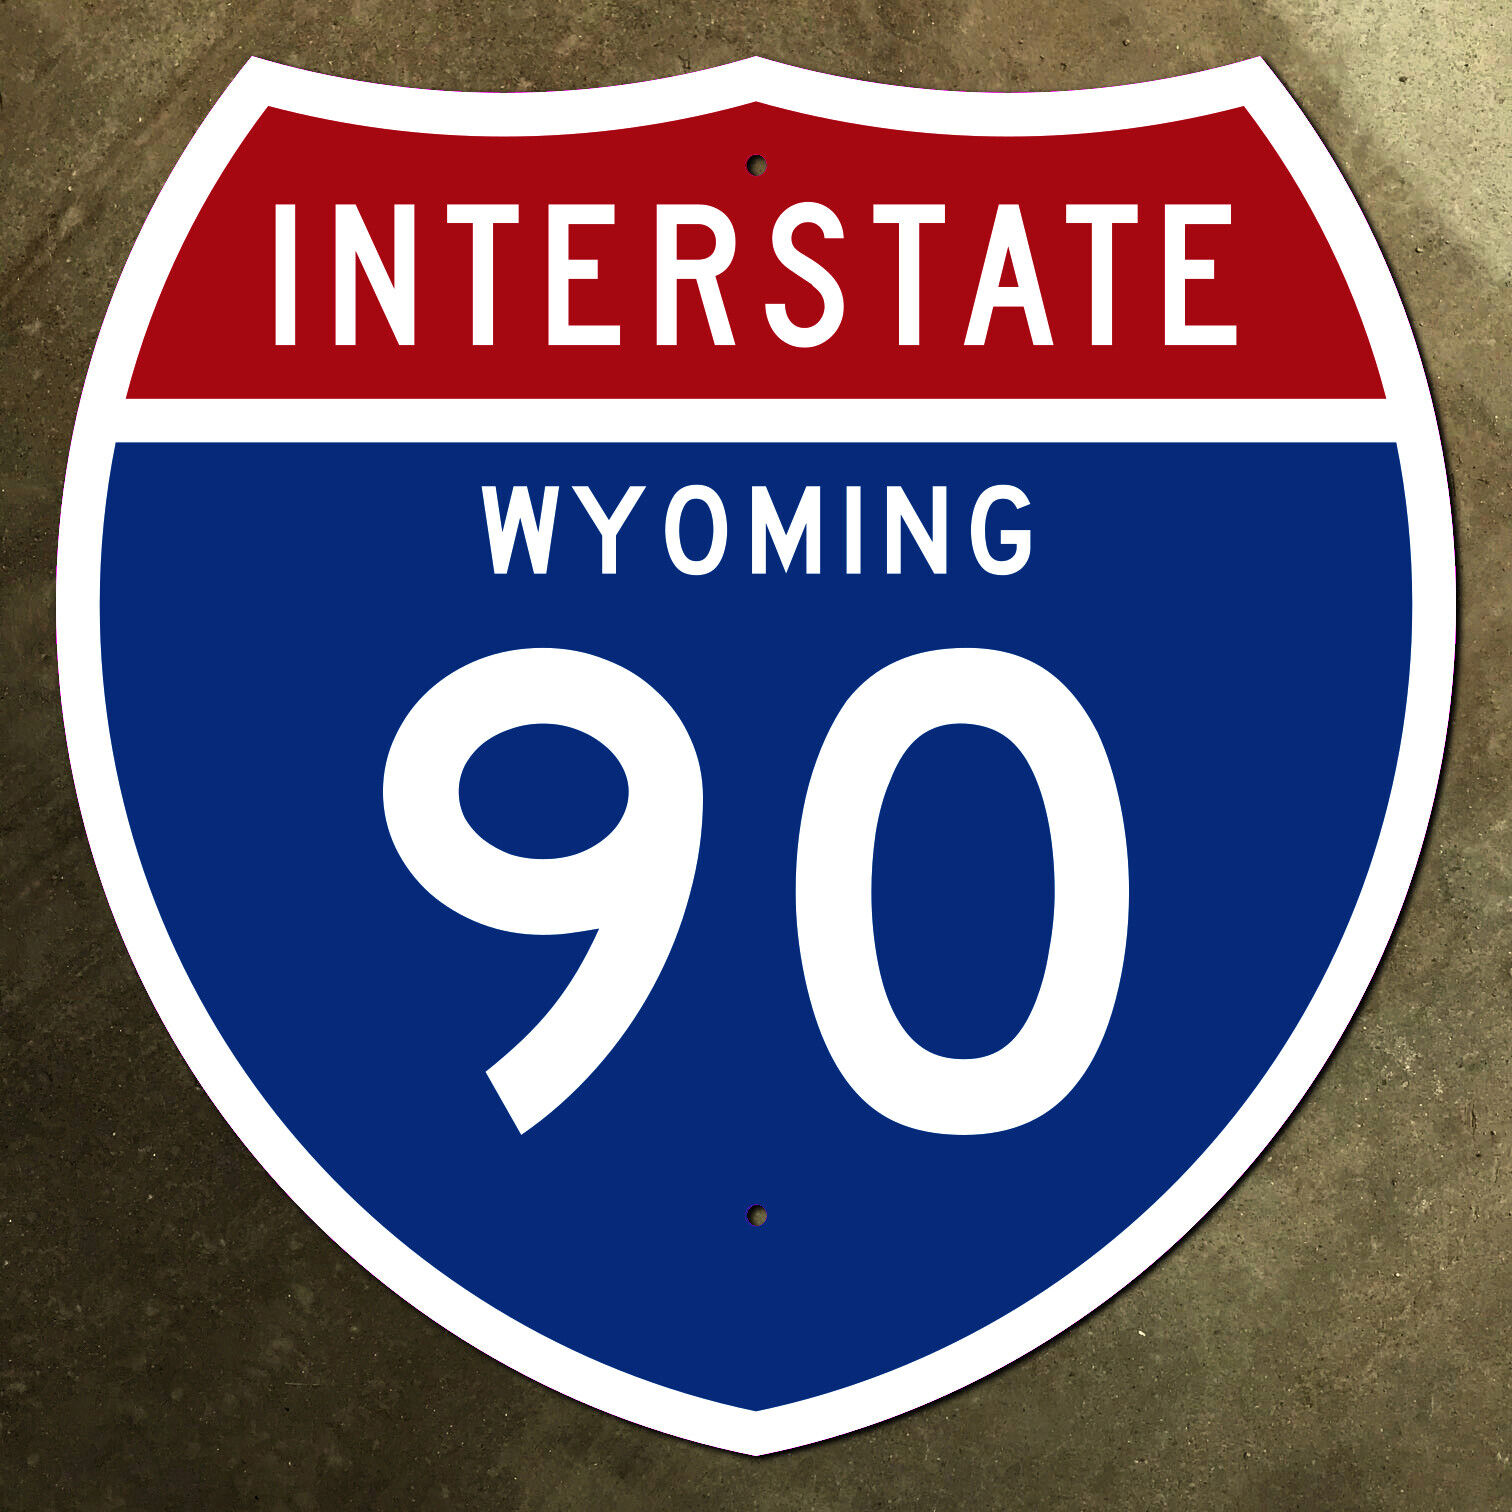 Wyoming interstate route 90 highway marker road sign 1957 Buffalo 18x18